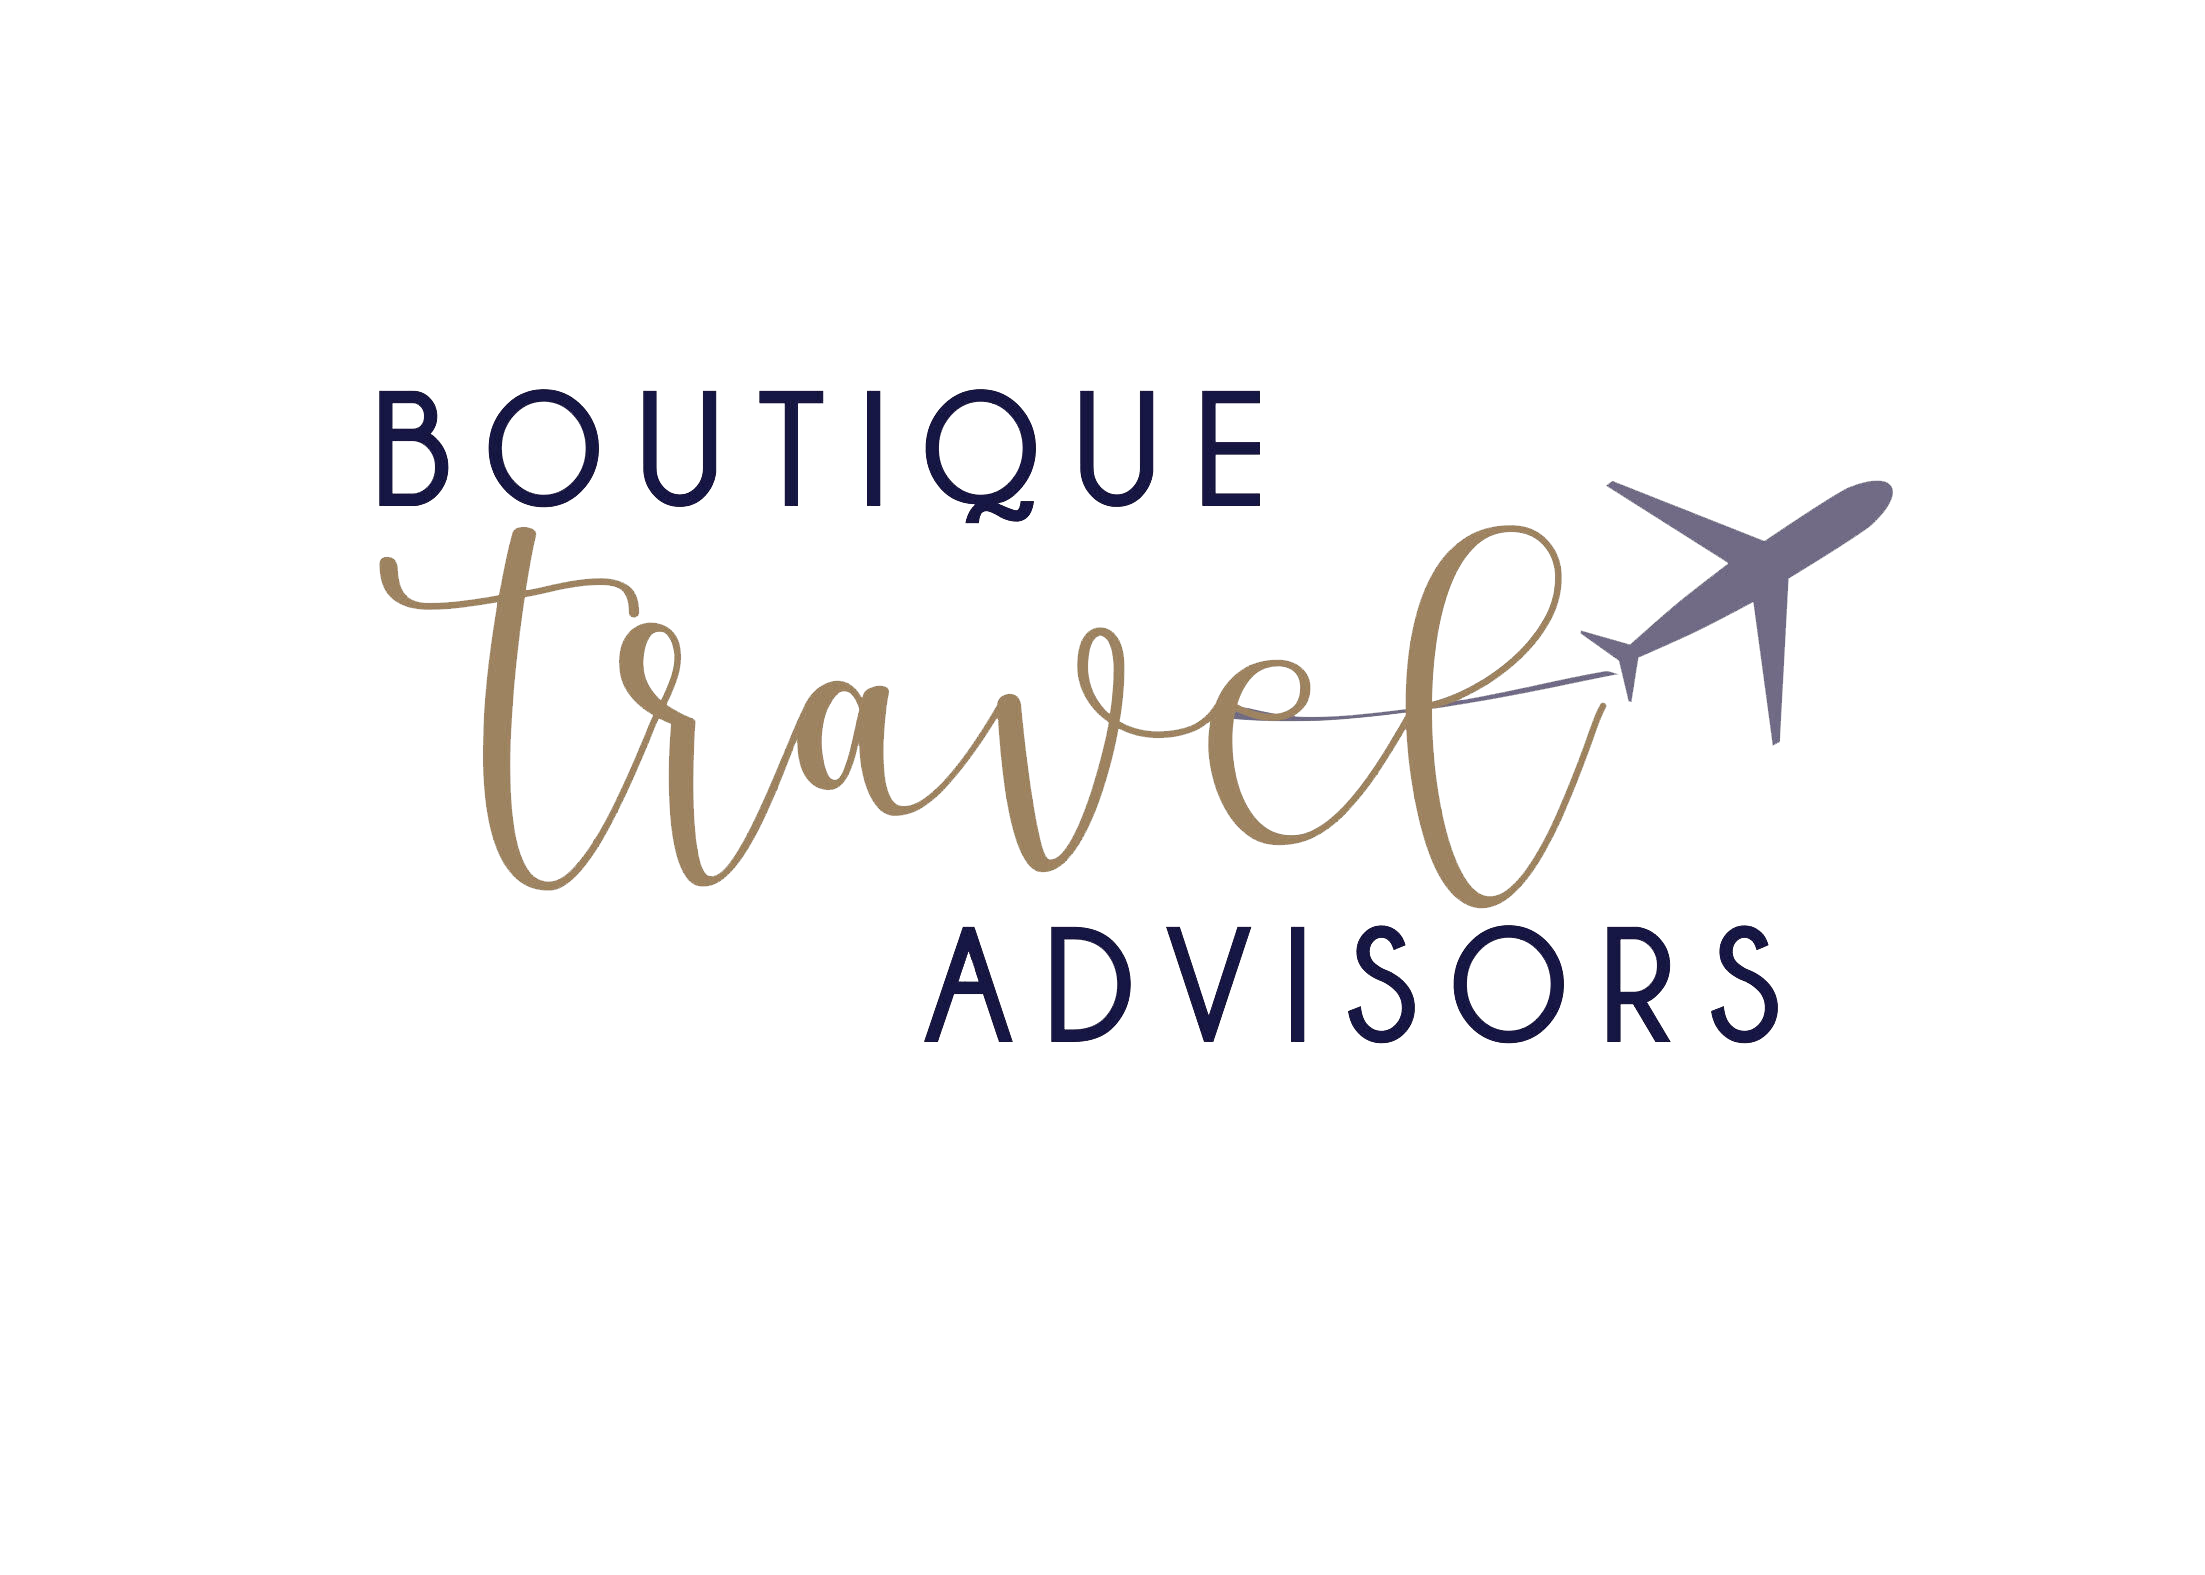 agencia boutique travel workers